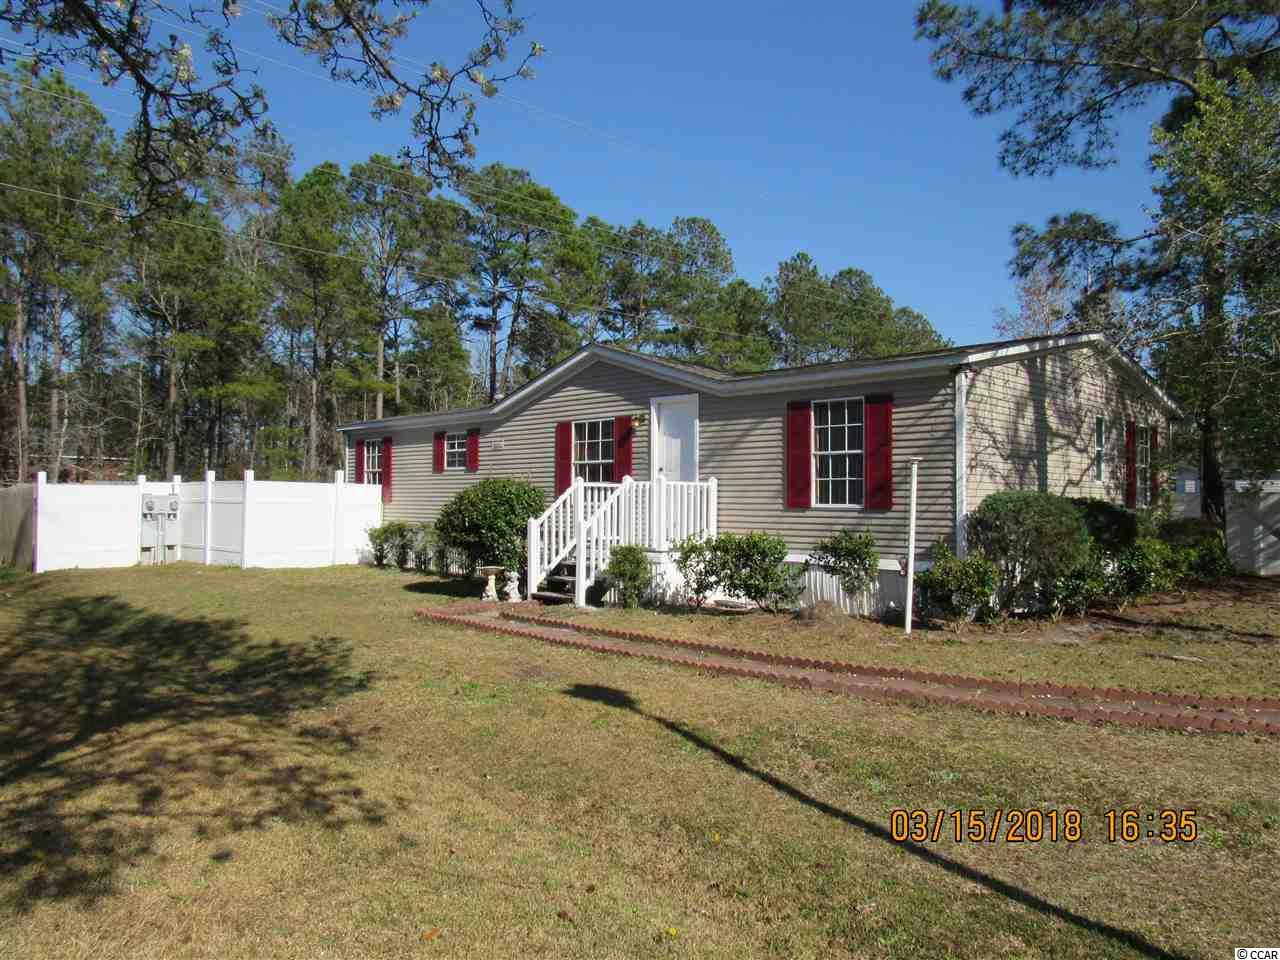 560 Southern Pines Dr. Myrtle Beach, SC 29579